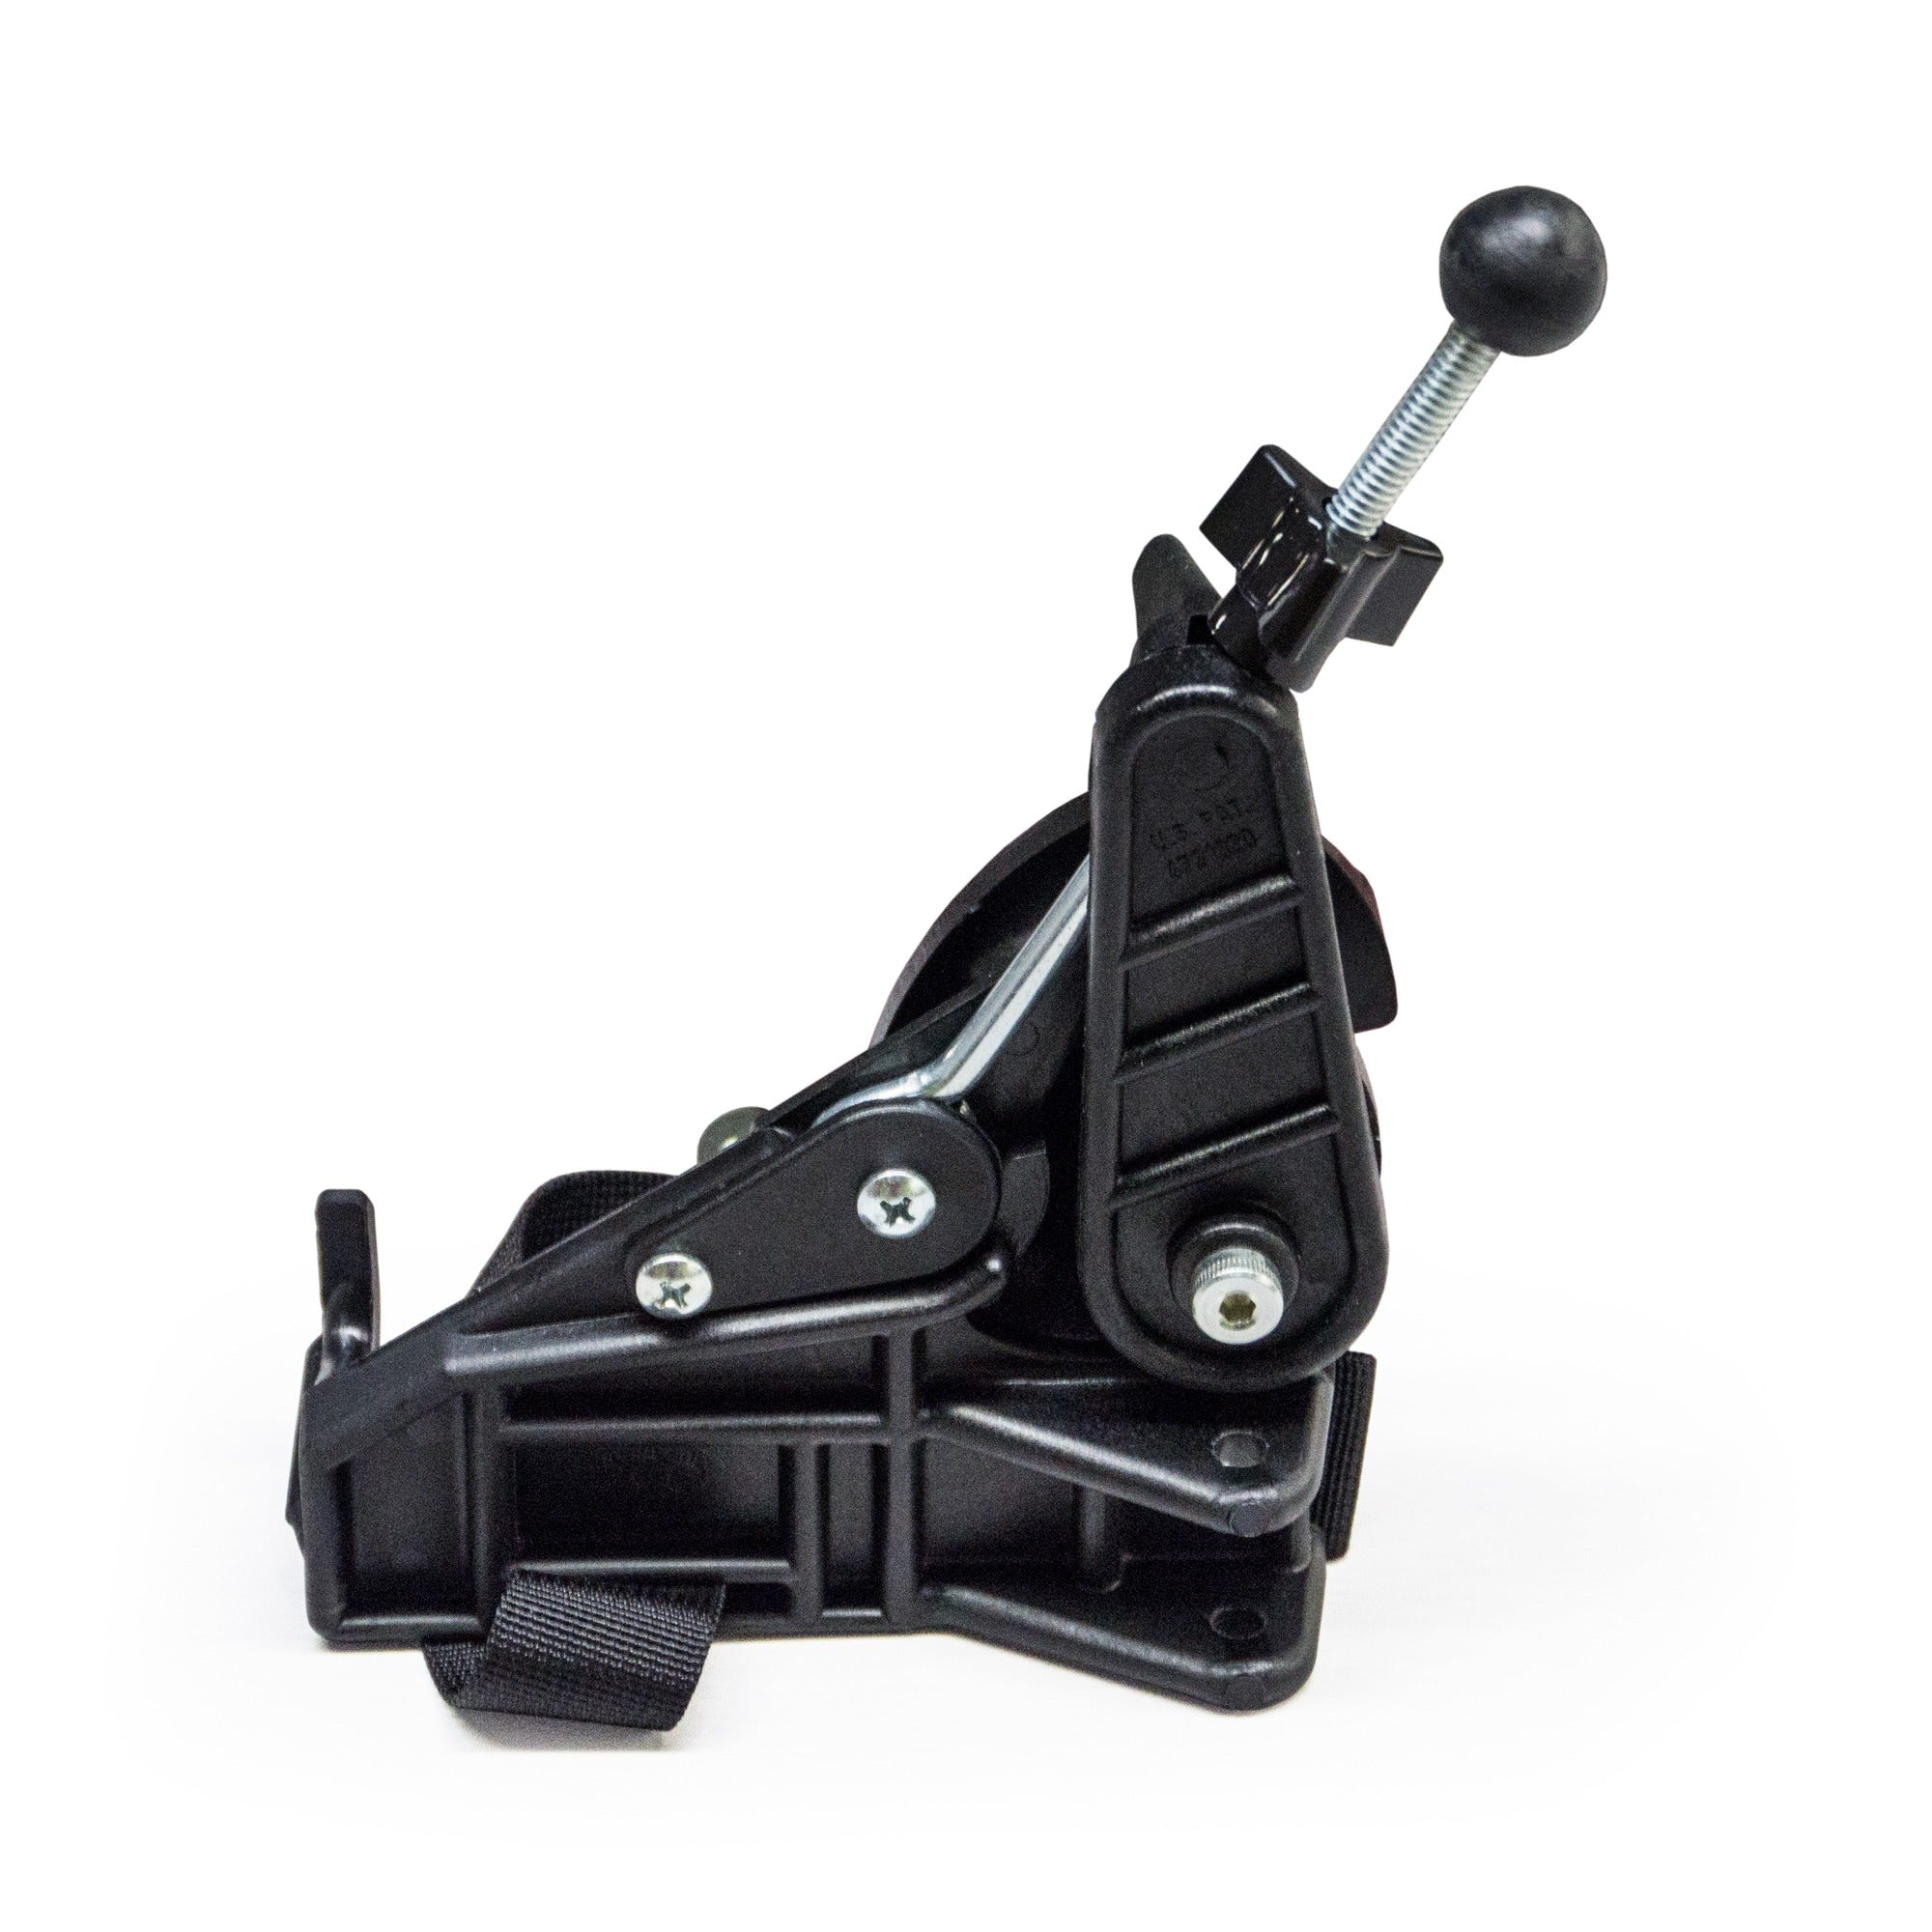 Burley Classic Pivoting Hitch Attachment for Most Traditional Bikes